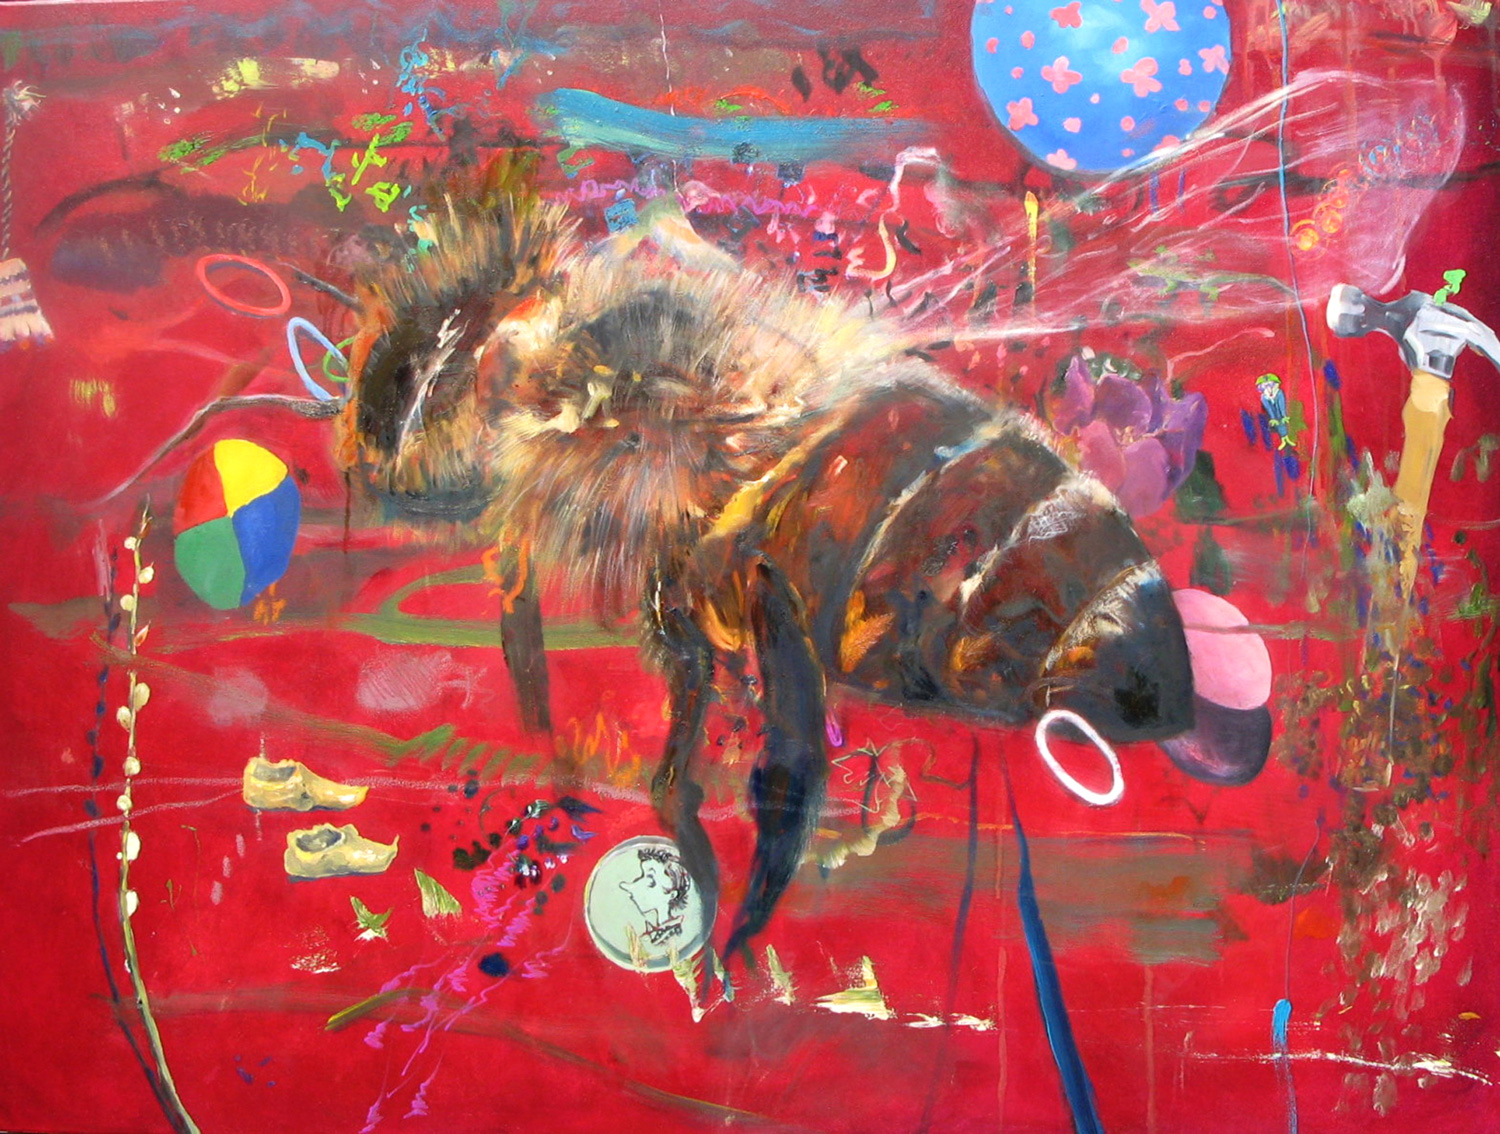 23._Where-Have-All-the-Honey-Bees-Gone_-Oil-on-canvas-40-x-30_-2014-.4800